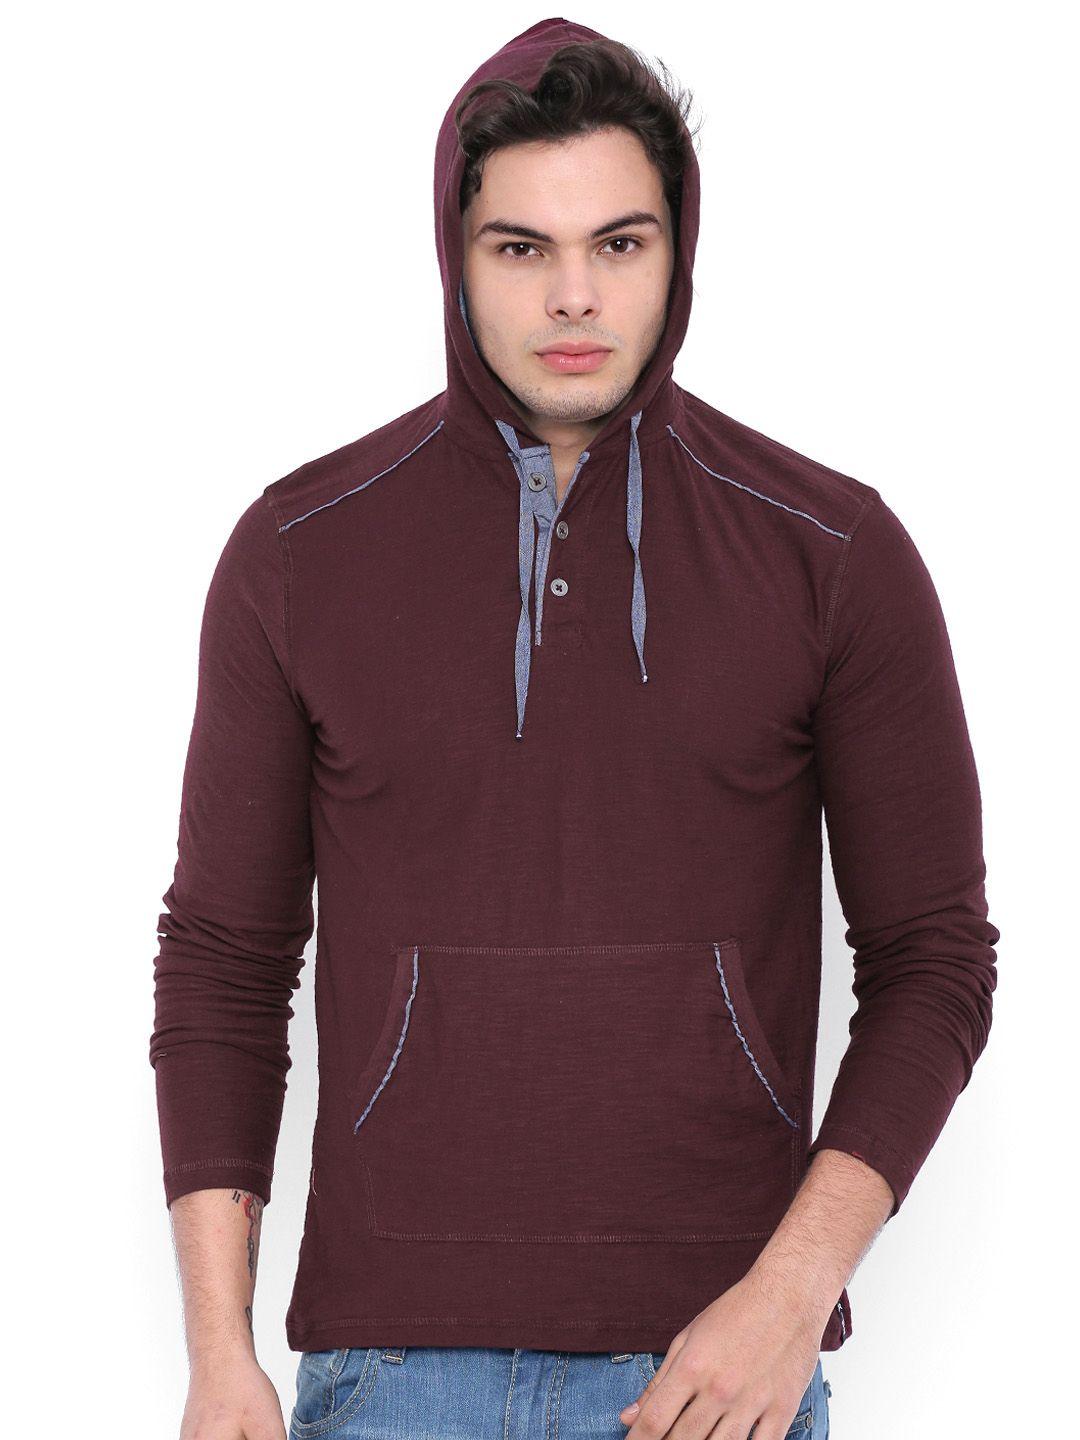 arise men maroon solid hooded t-shirt